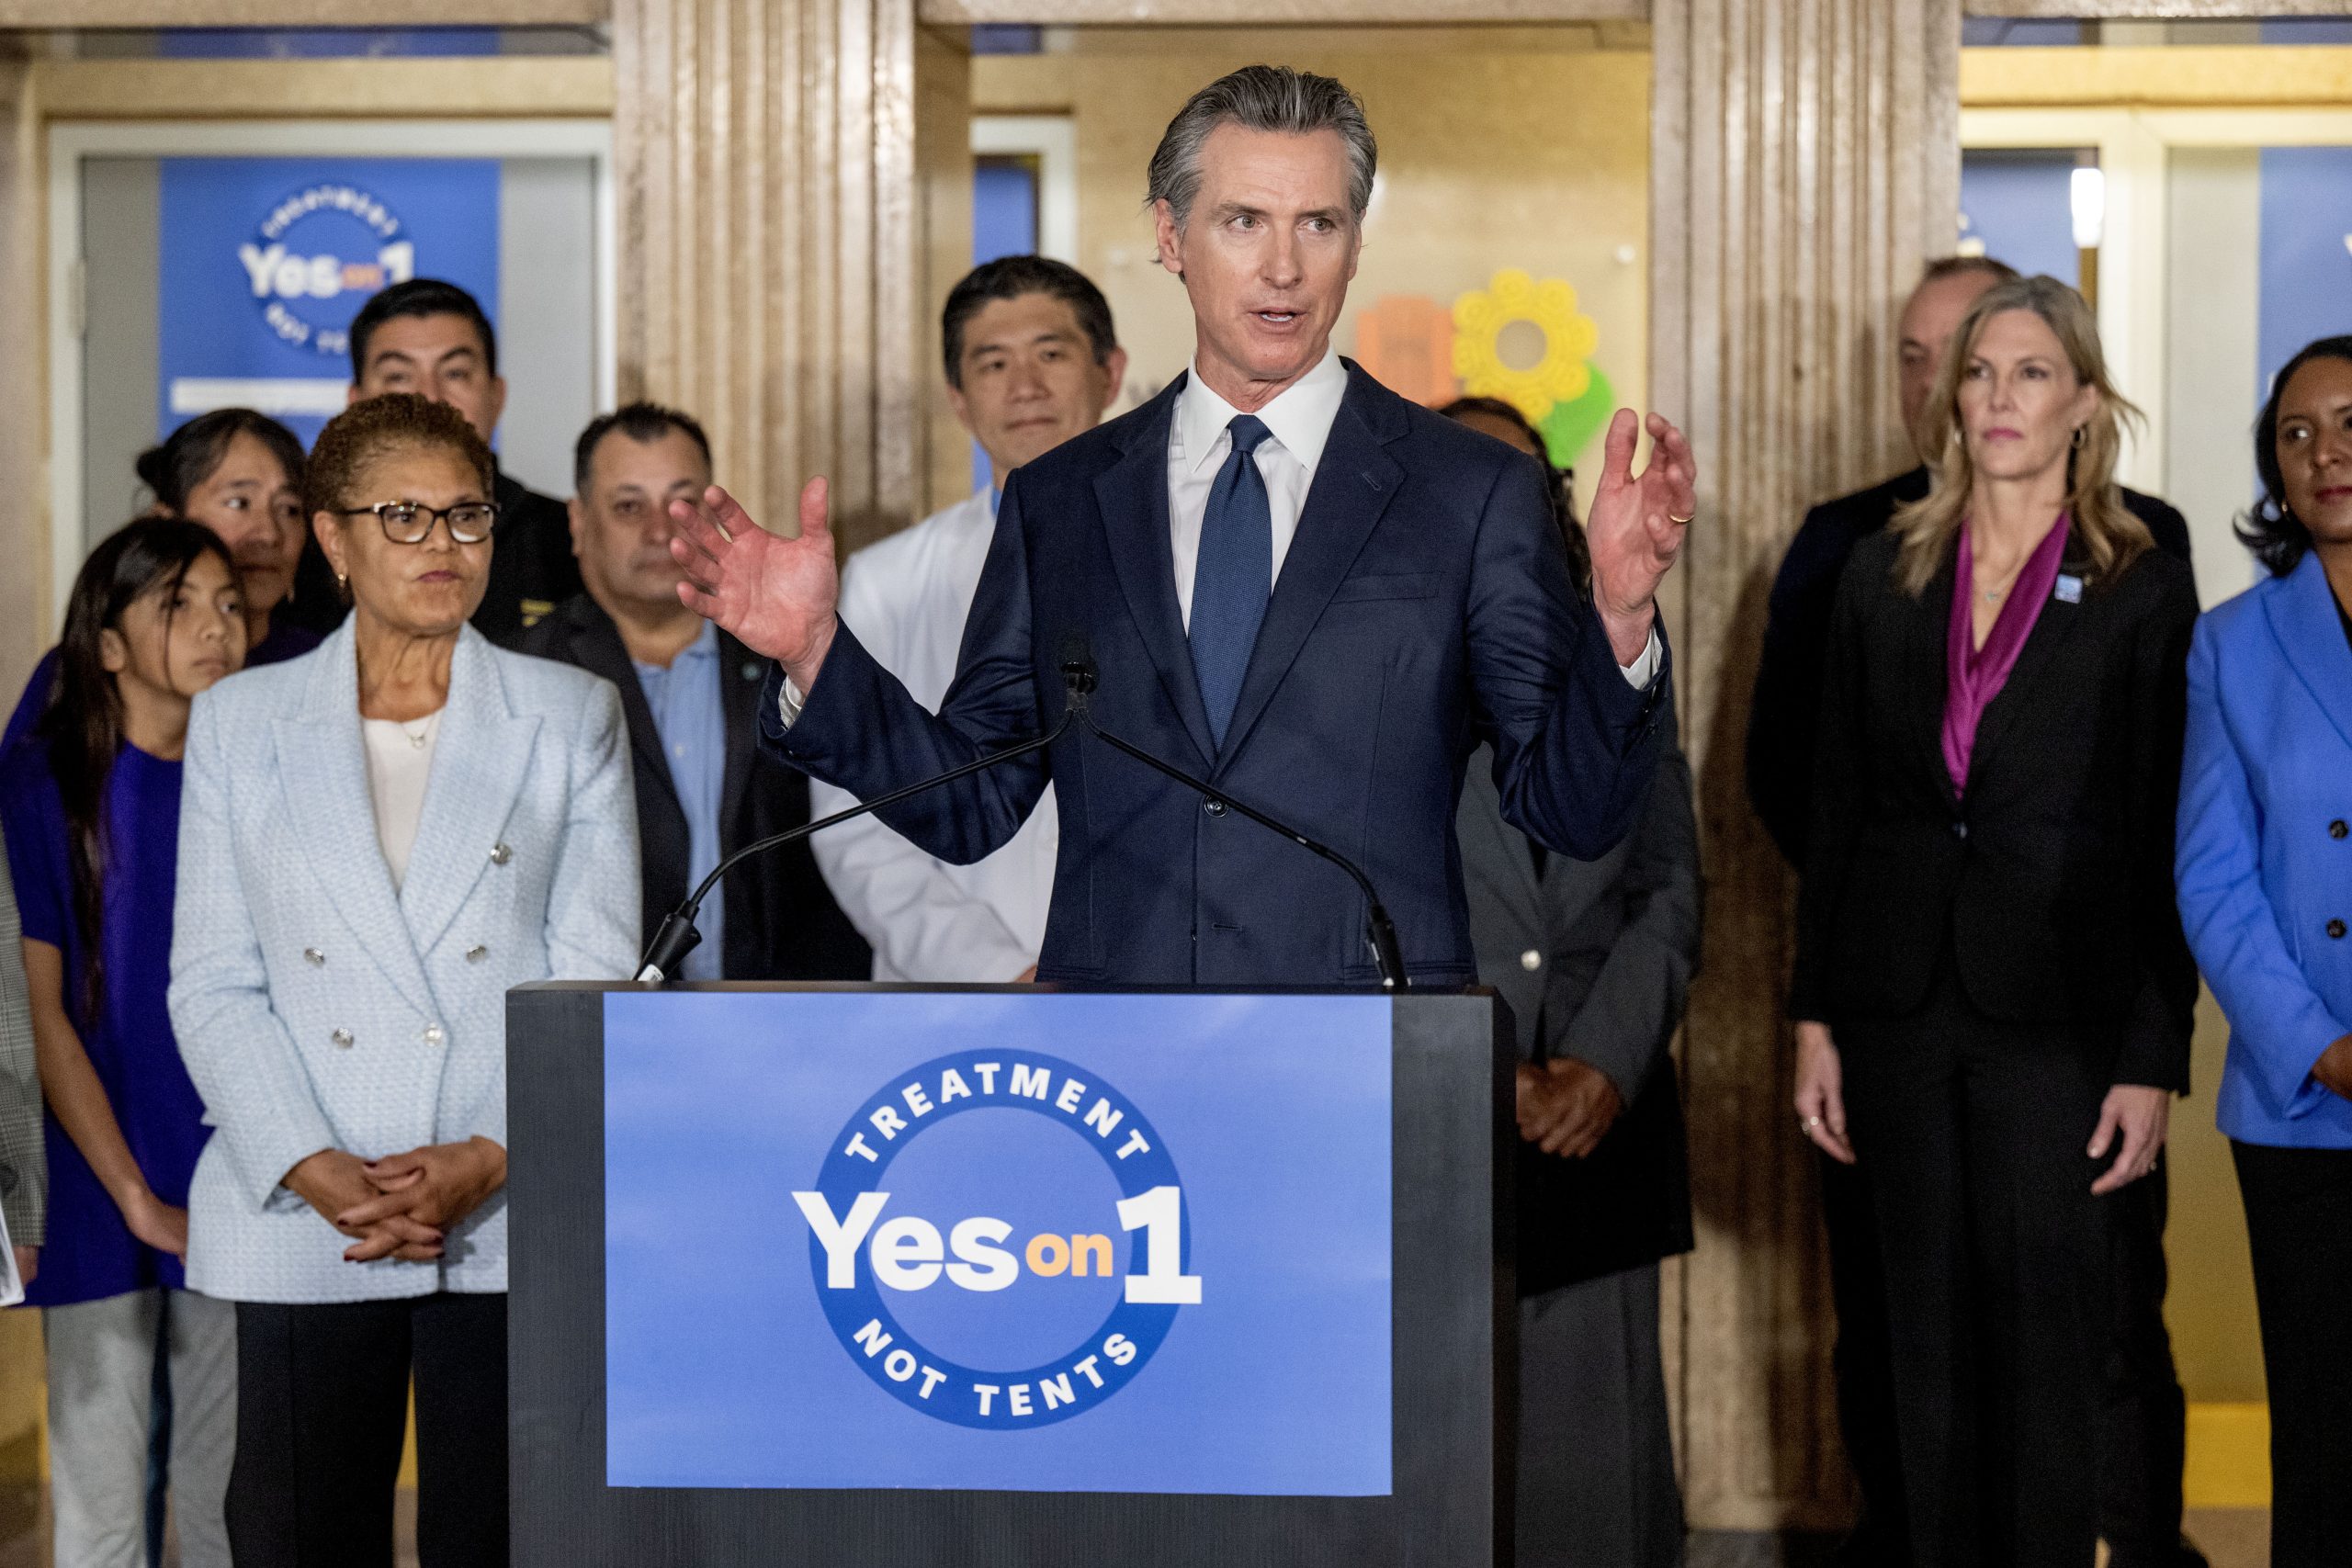 California’s Proposition 1: ‘Treatment Not Tents’